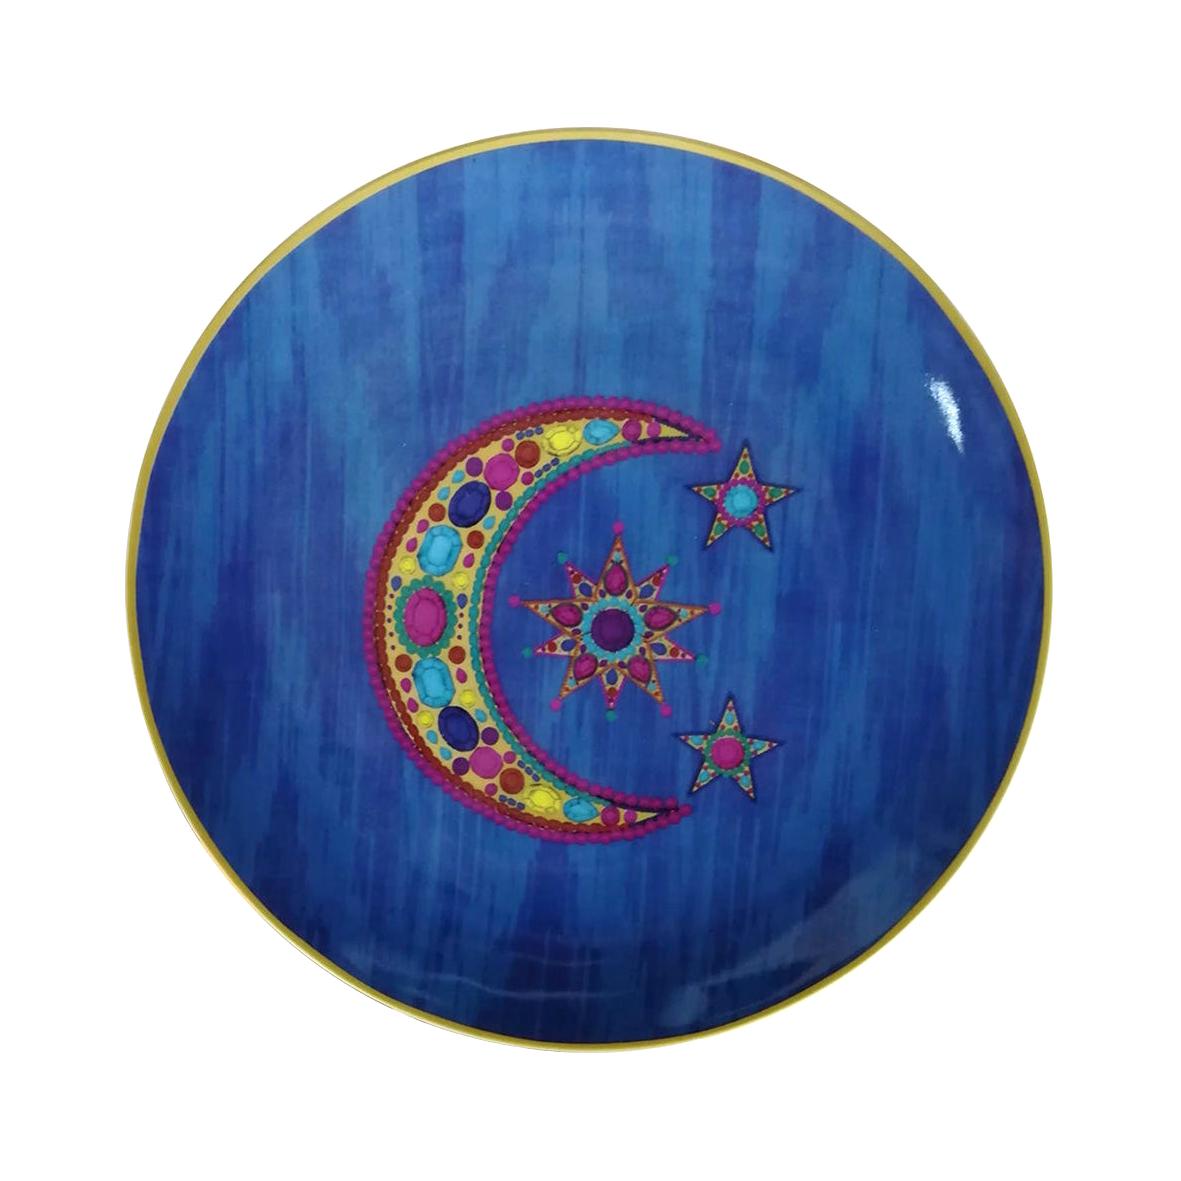 Les Ottomans "The Moon Design" Small Porcelain Plate by Matthew Williamson